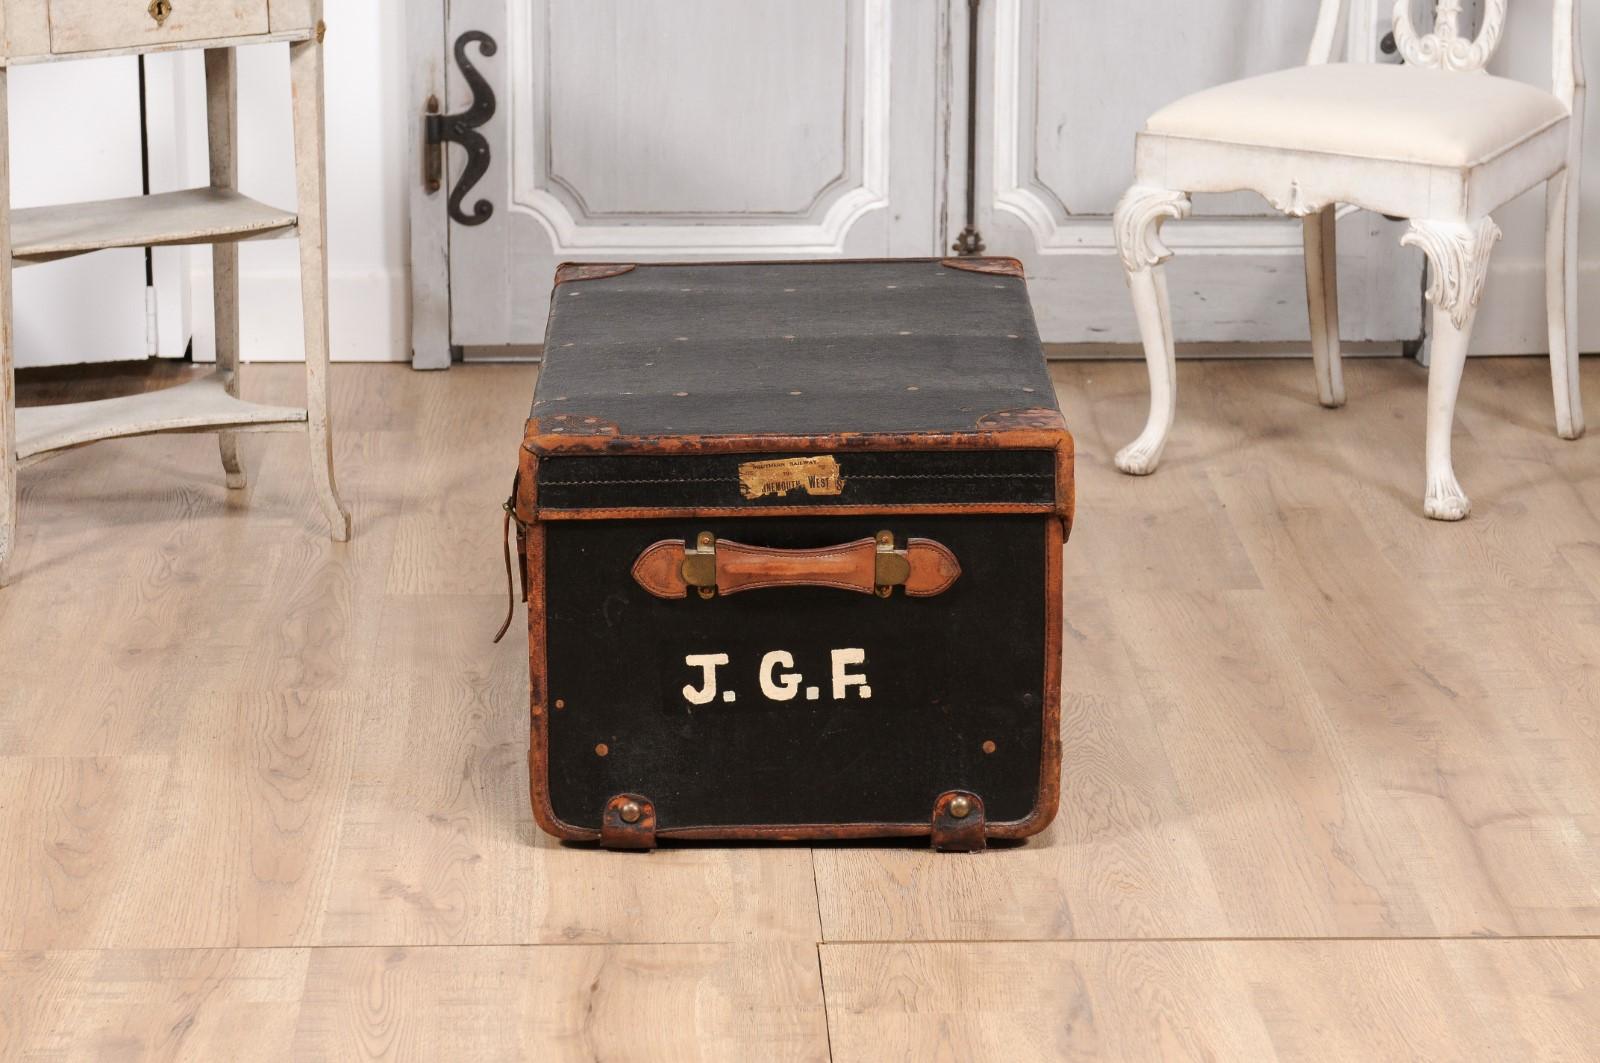 English Victorian Period 19th Century Black Traveling Trunk With Initials J.G.F. For Sale 8